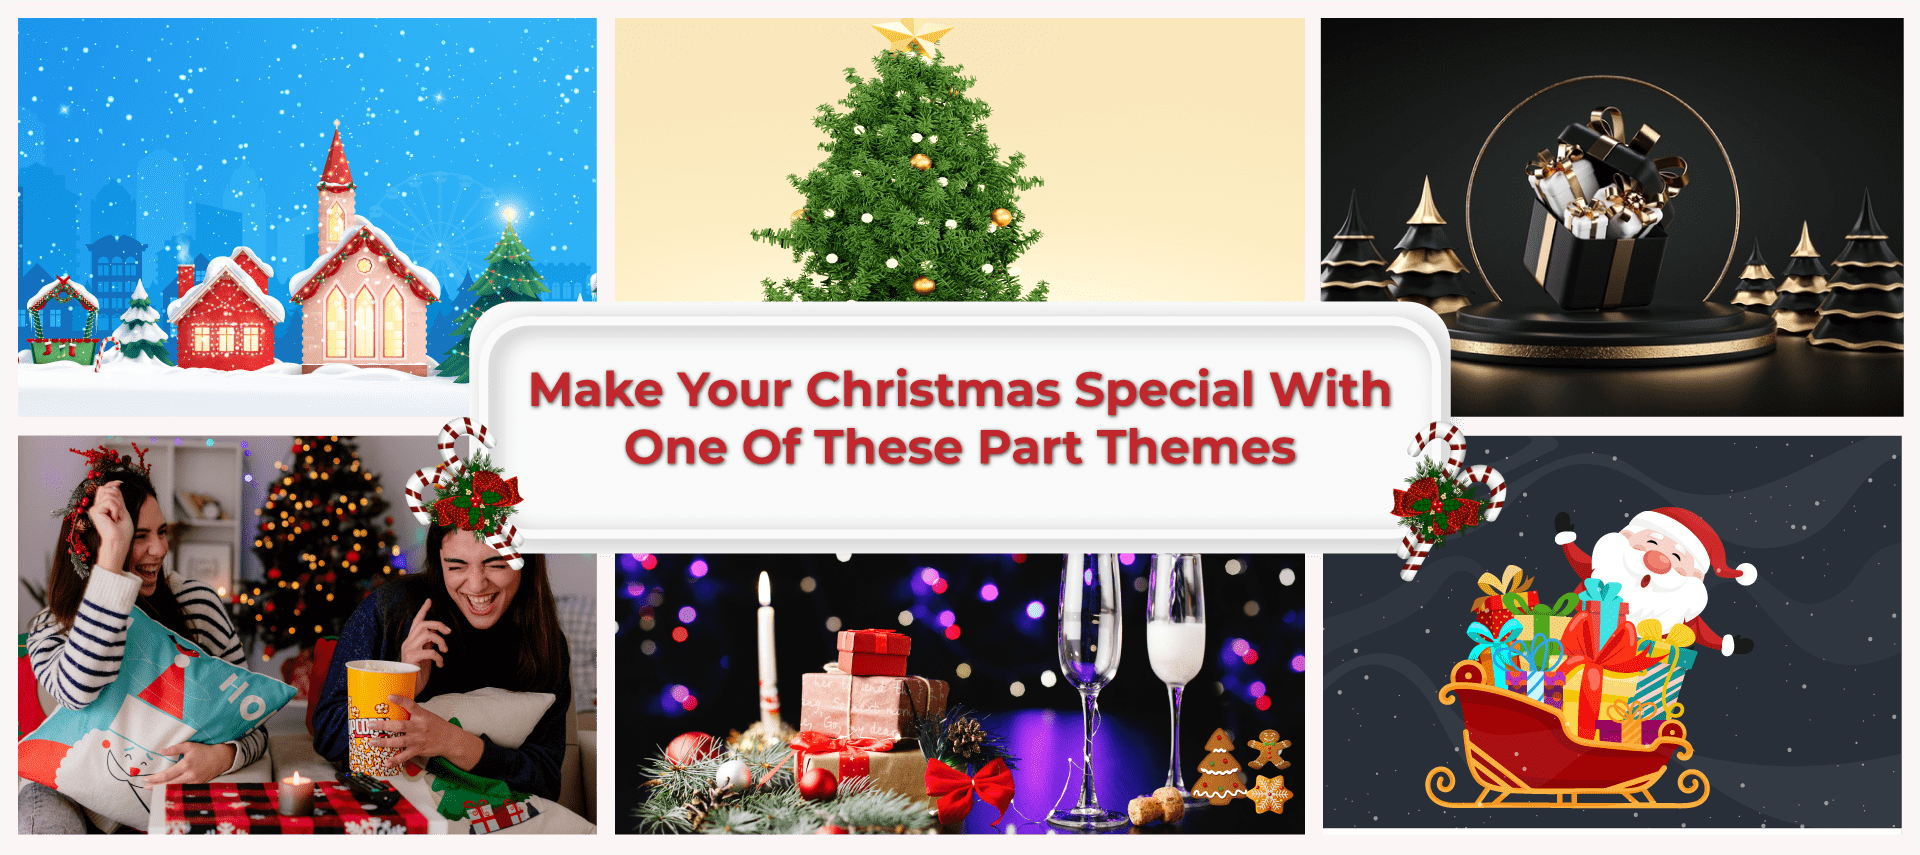 Make Your Christmas Special With One Of These Part Themes